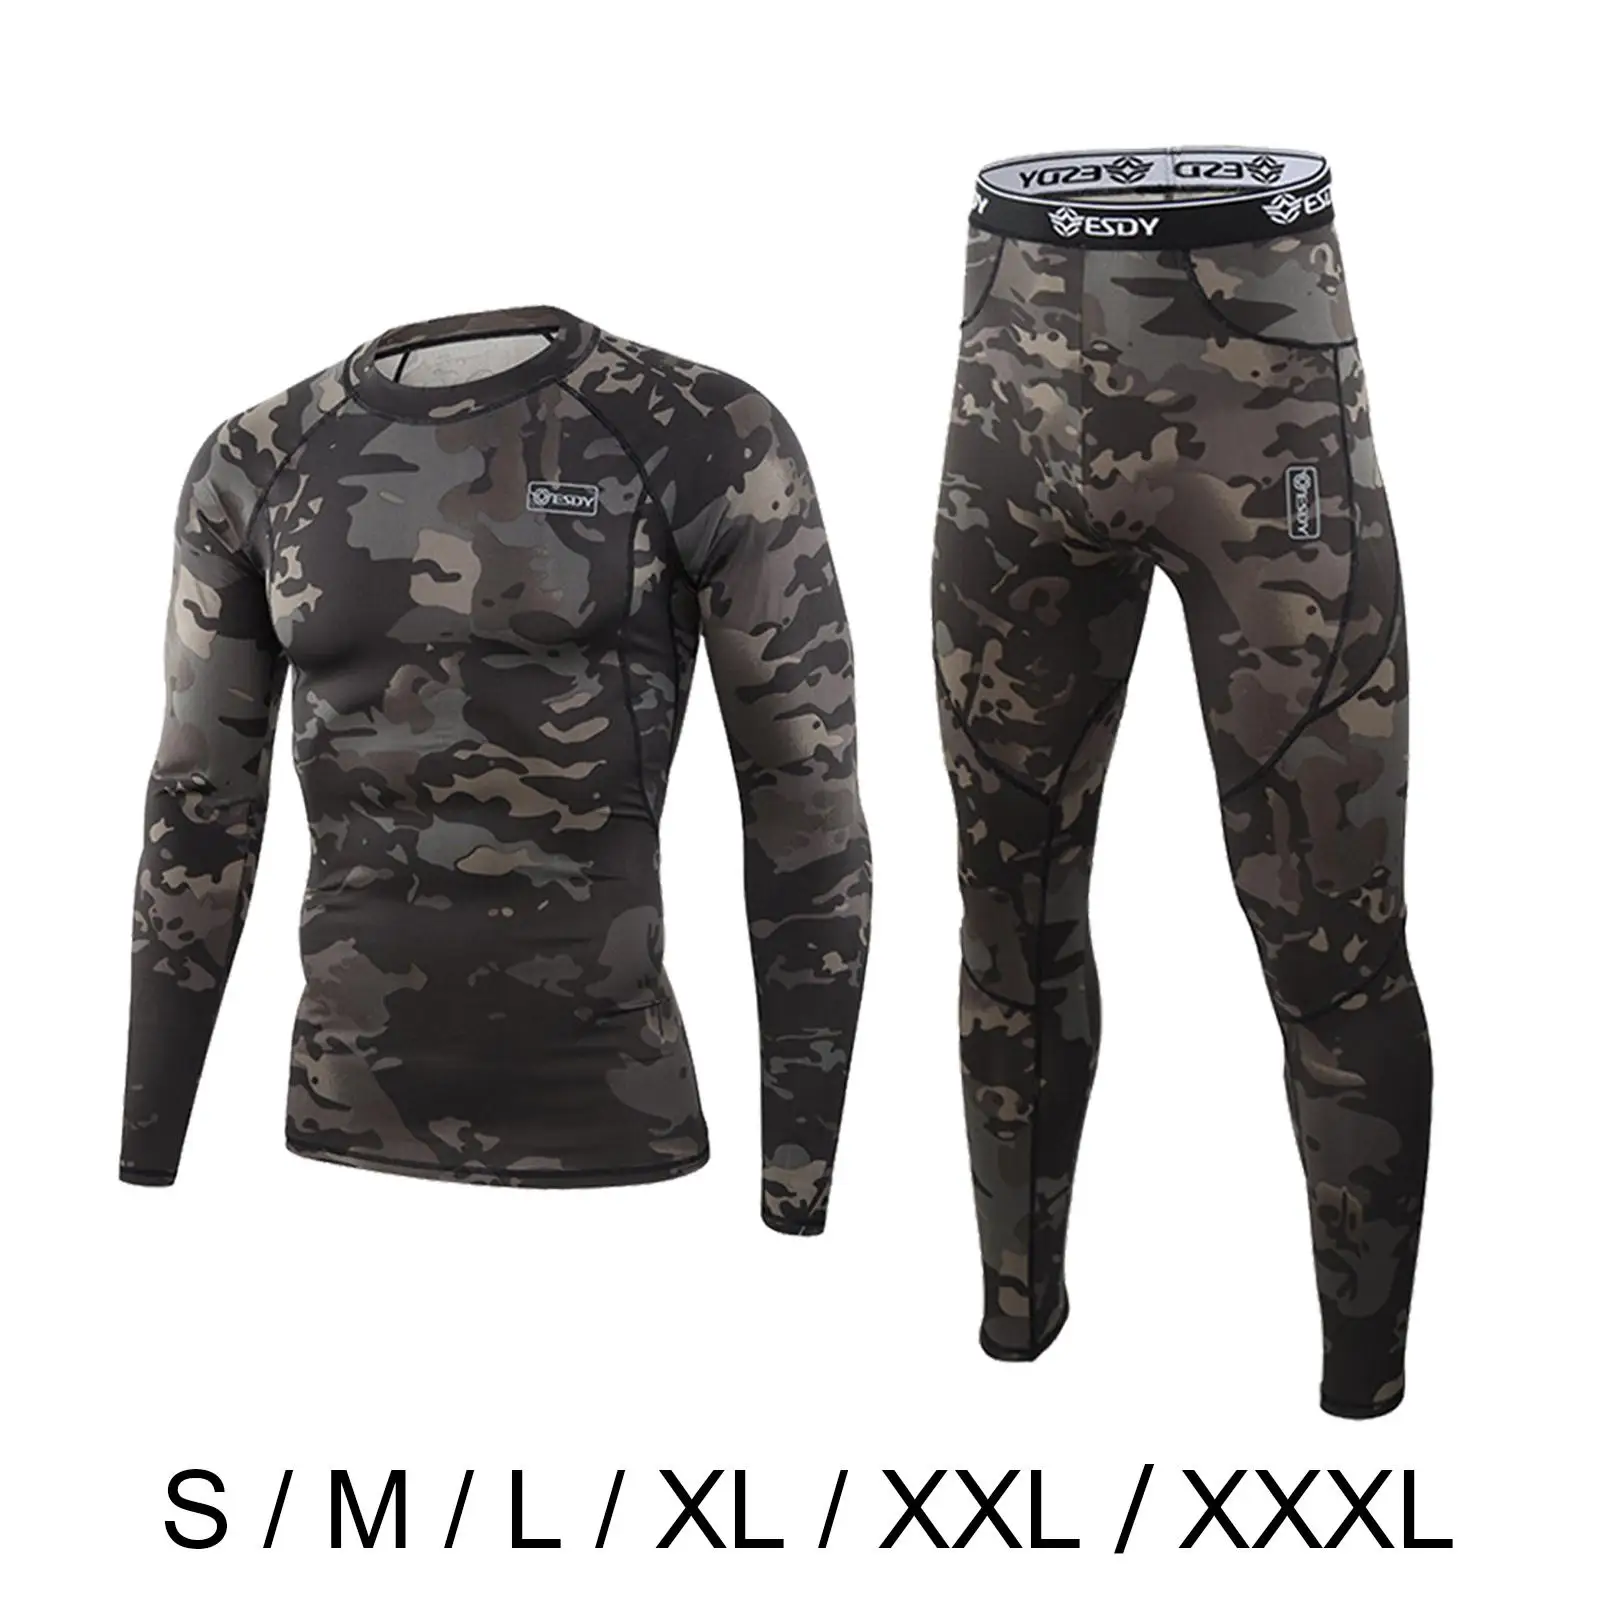 Thermal Underwear Set Cold Weather Top & Bottom Sweat Quick Drying Clothing Long Johns for Men Women Cycling Fishing Camping